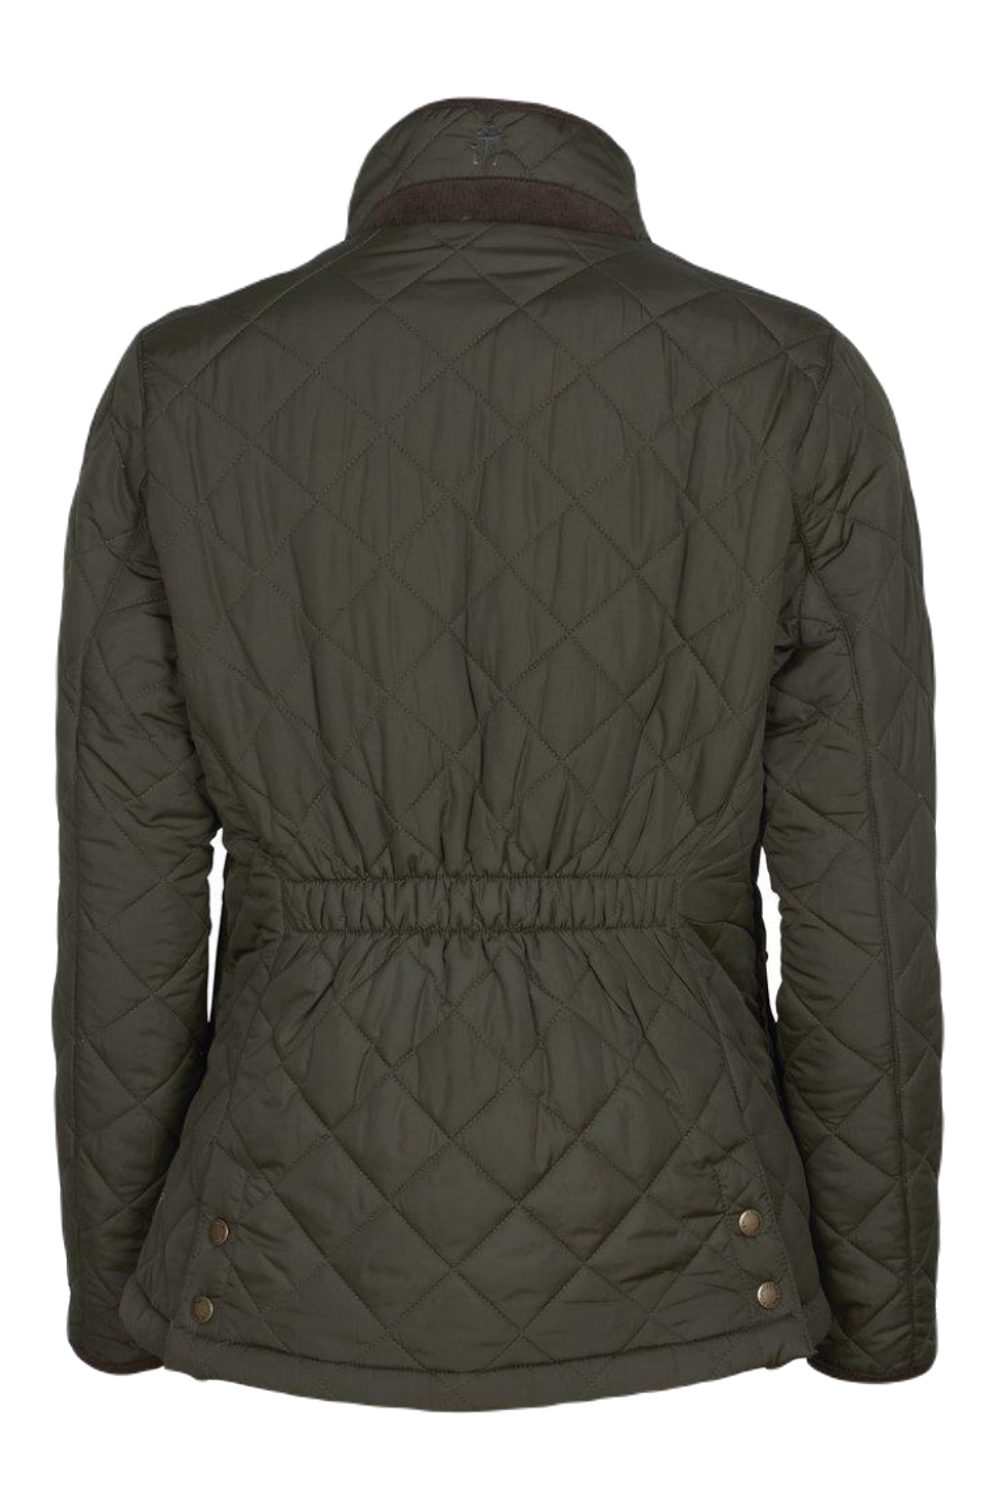 Pinewood Womens Nydala Classic Quilt Jacket in Moss Green